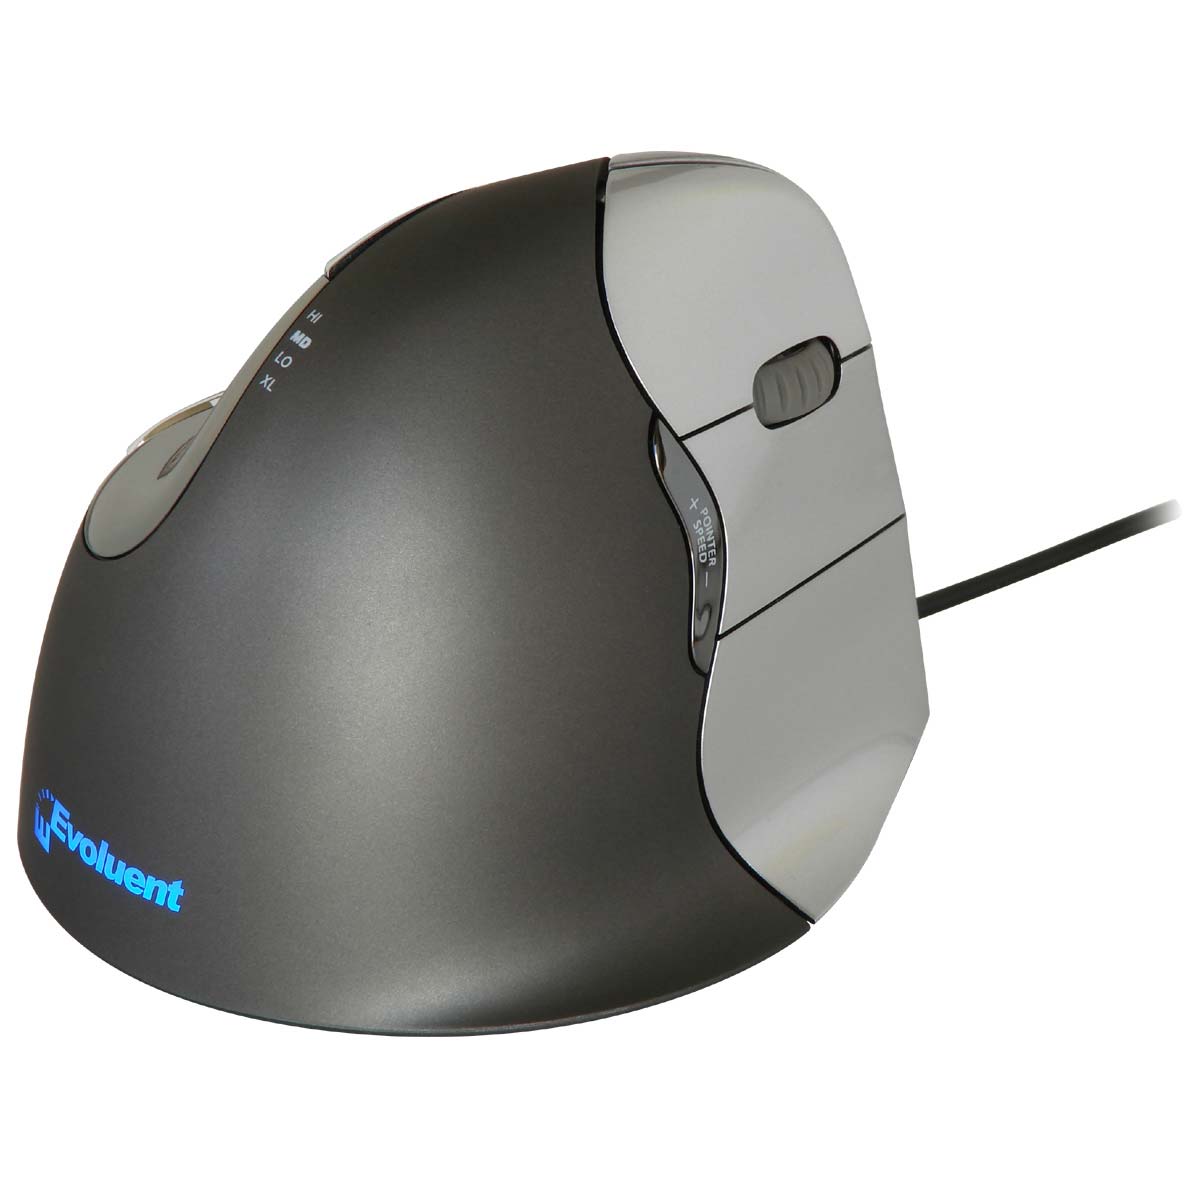 Evoluent vertical mouse 4 right for mac